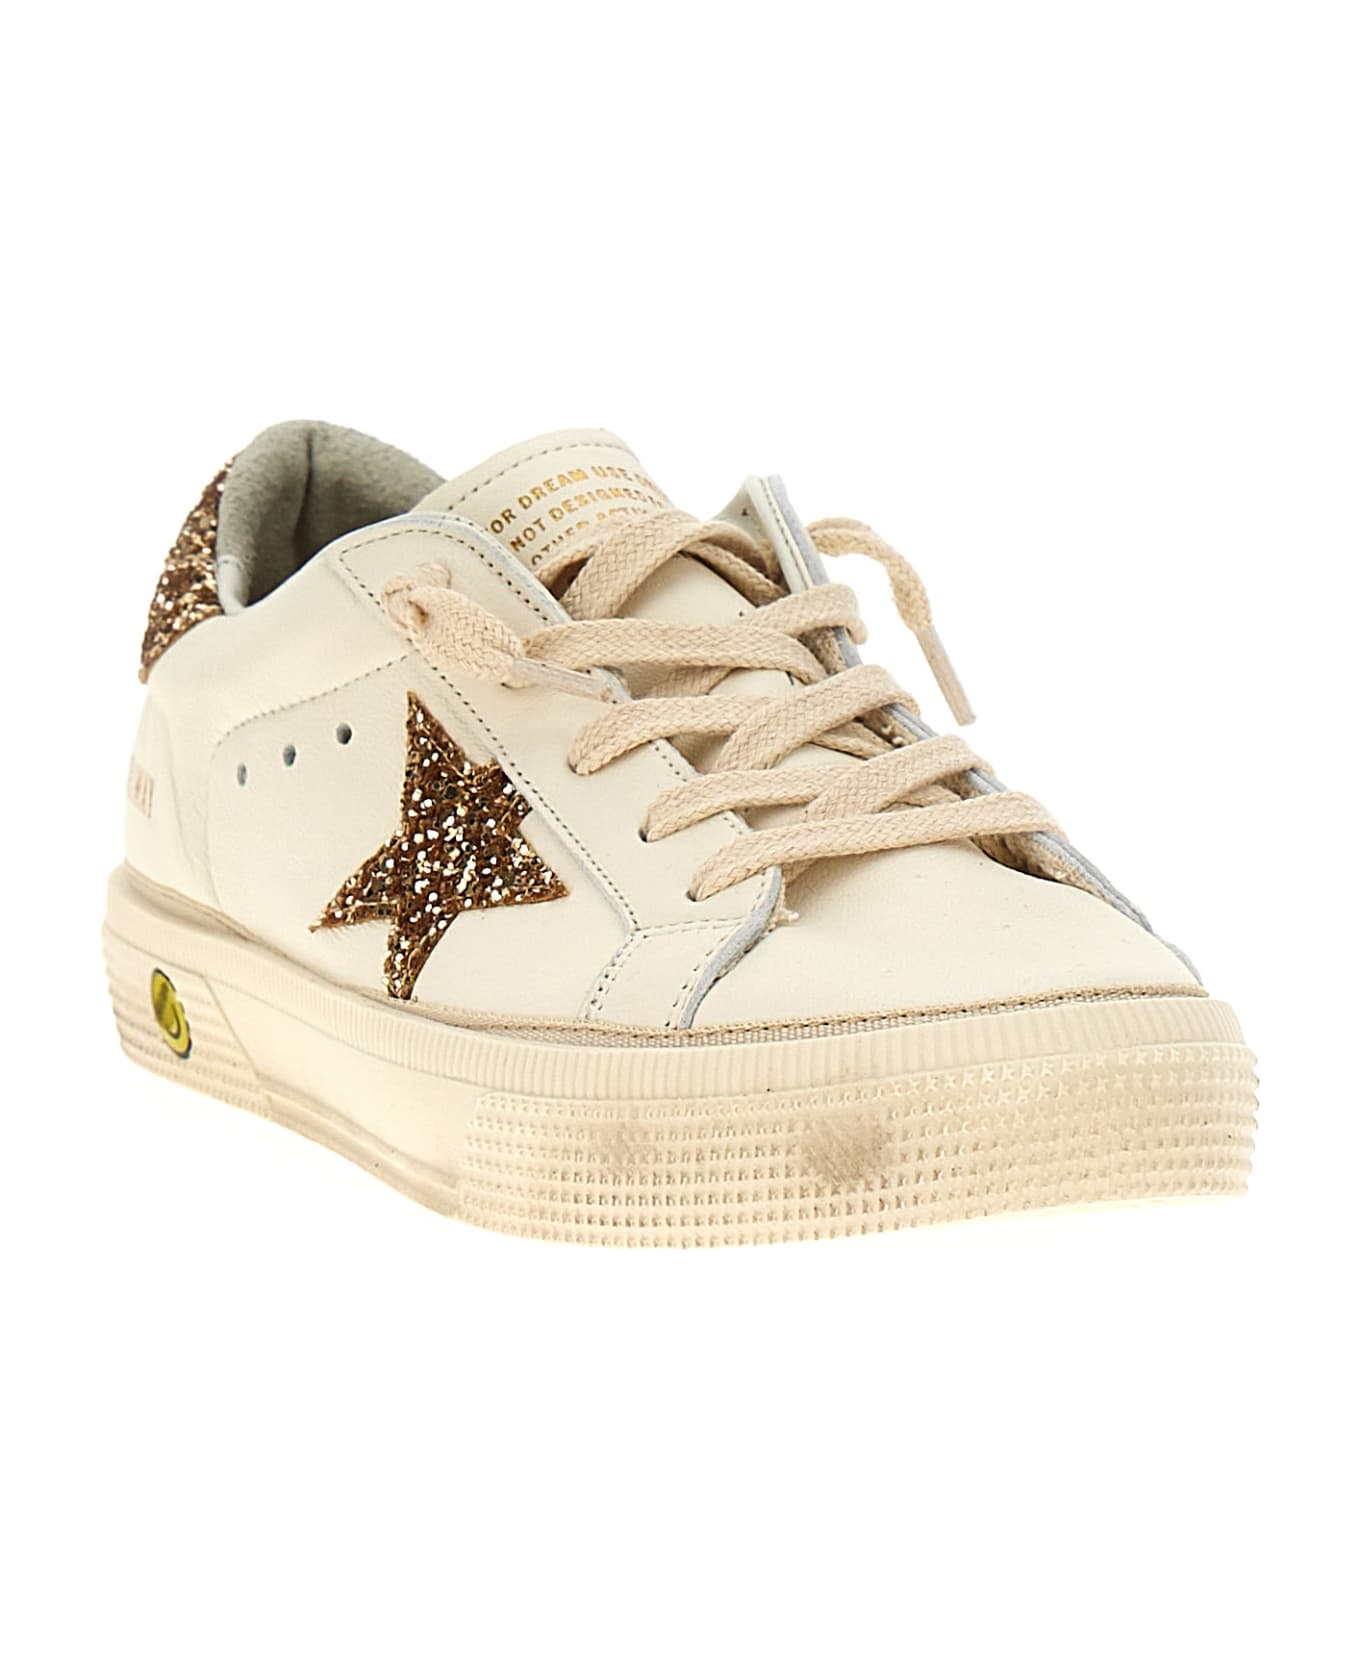 Golden Goose 'may' Sneakers - Gold